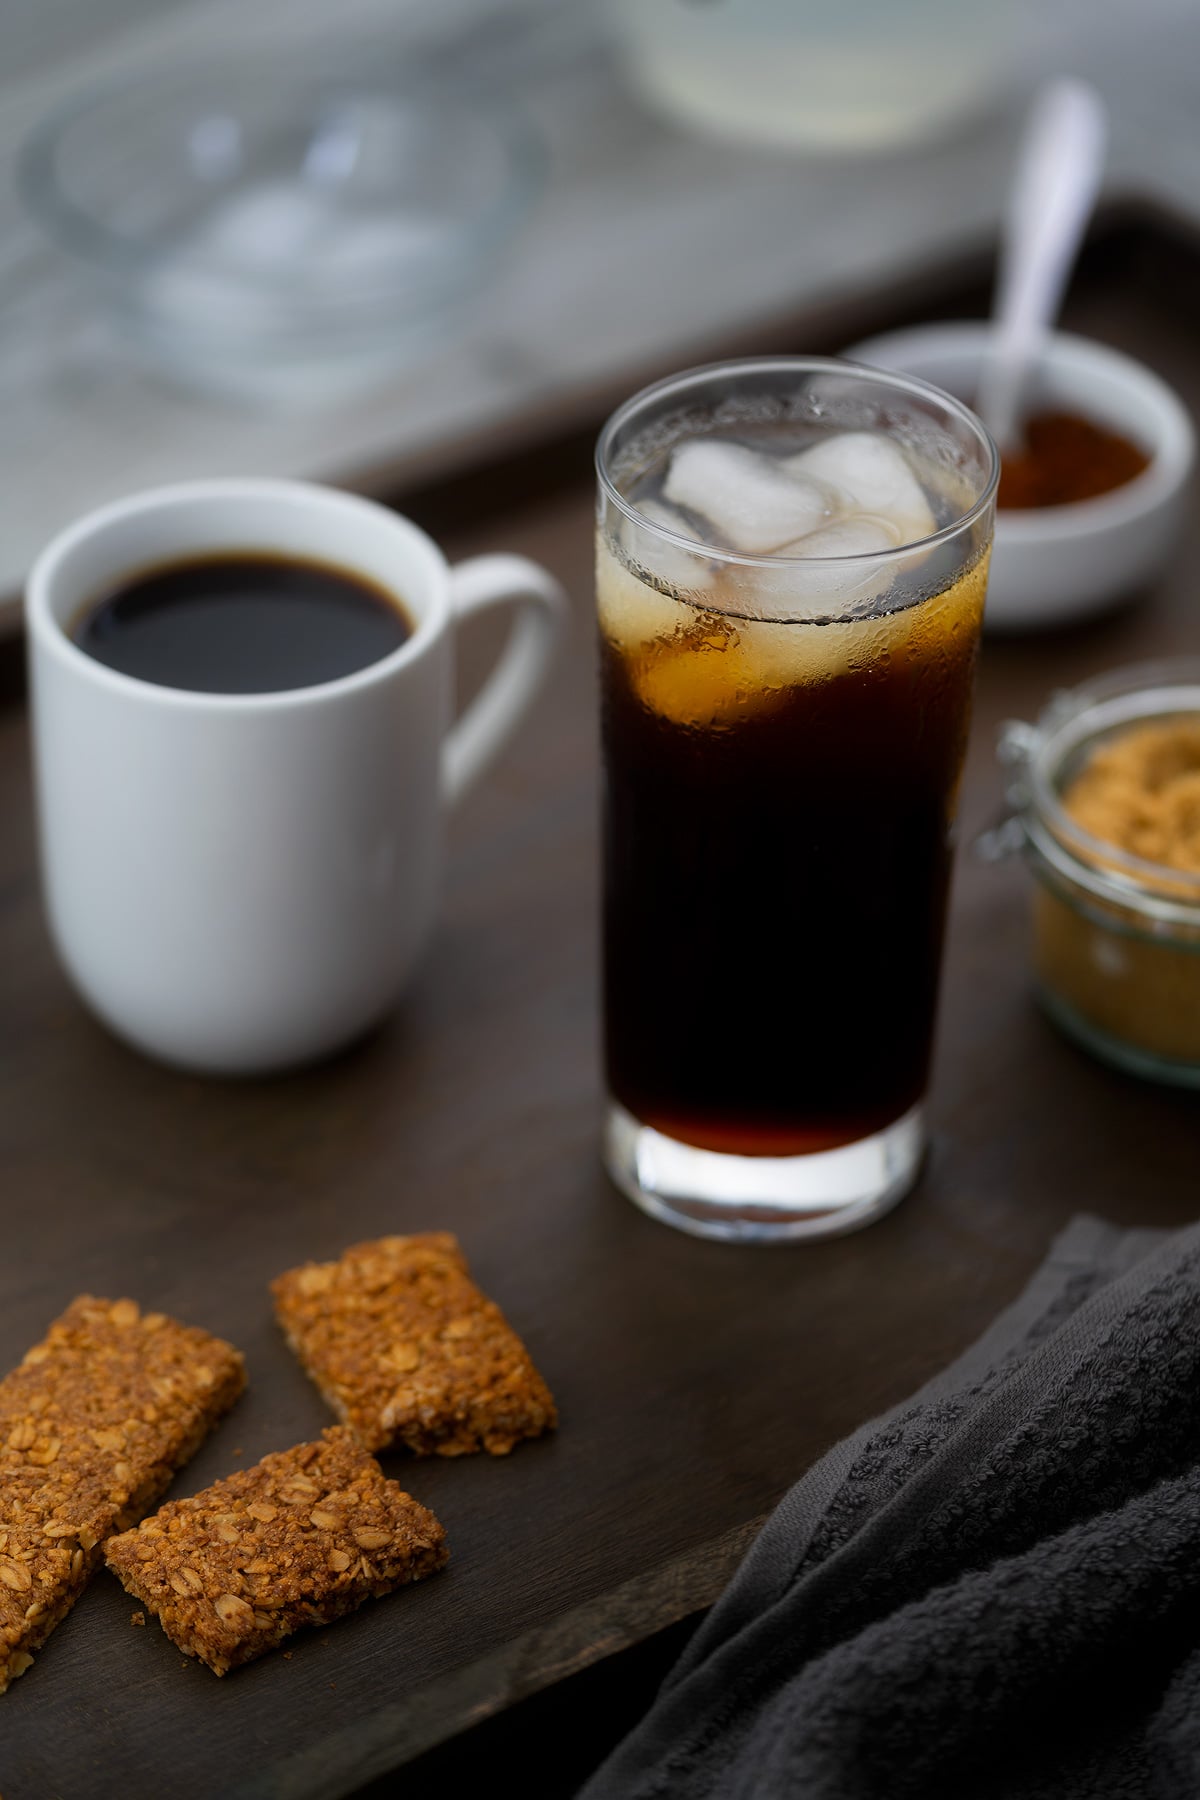 Hot and Iced Black Coffee served in a glass and coffee cup.